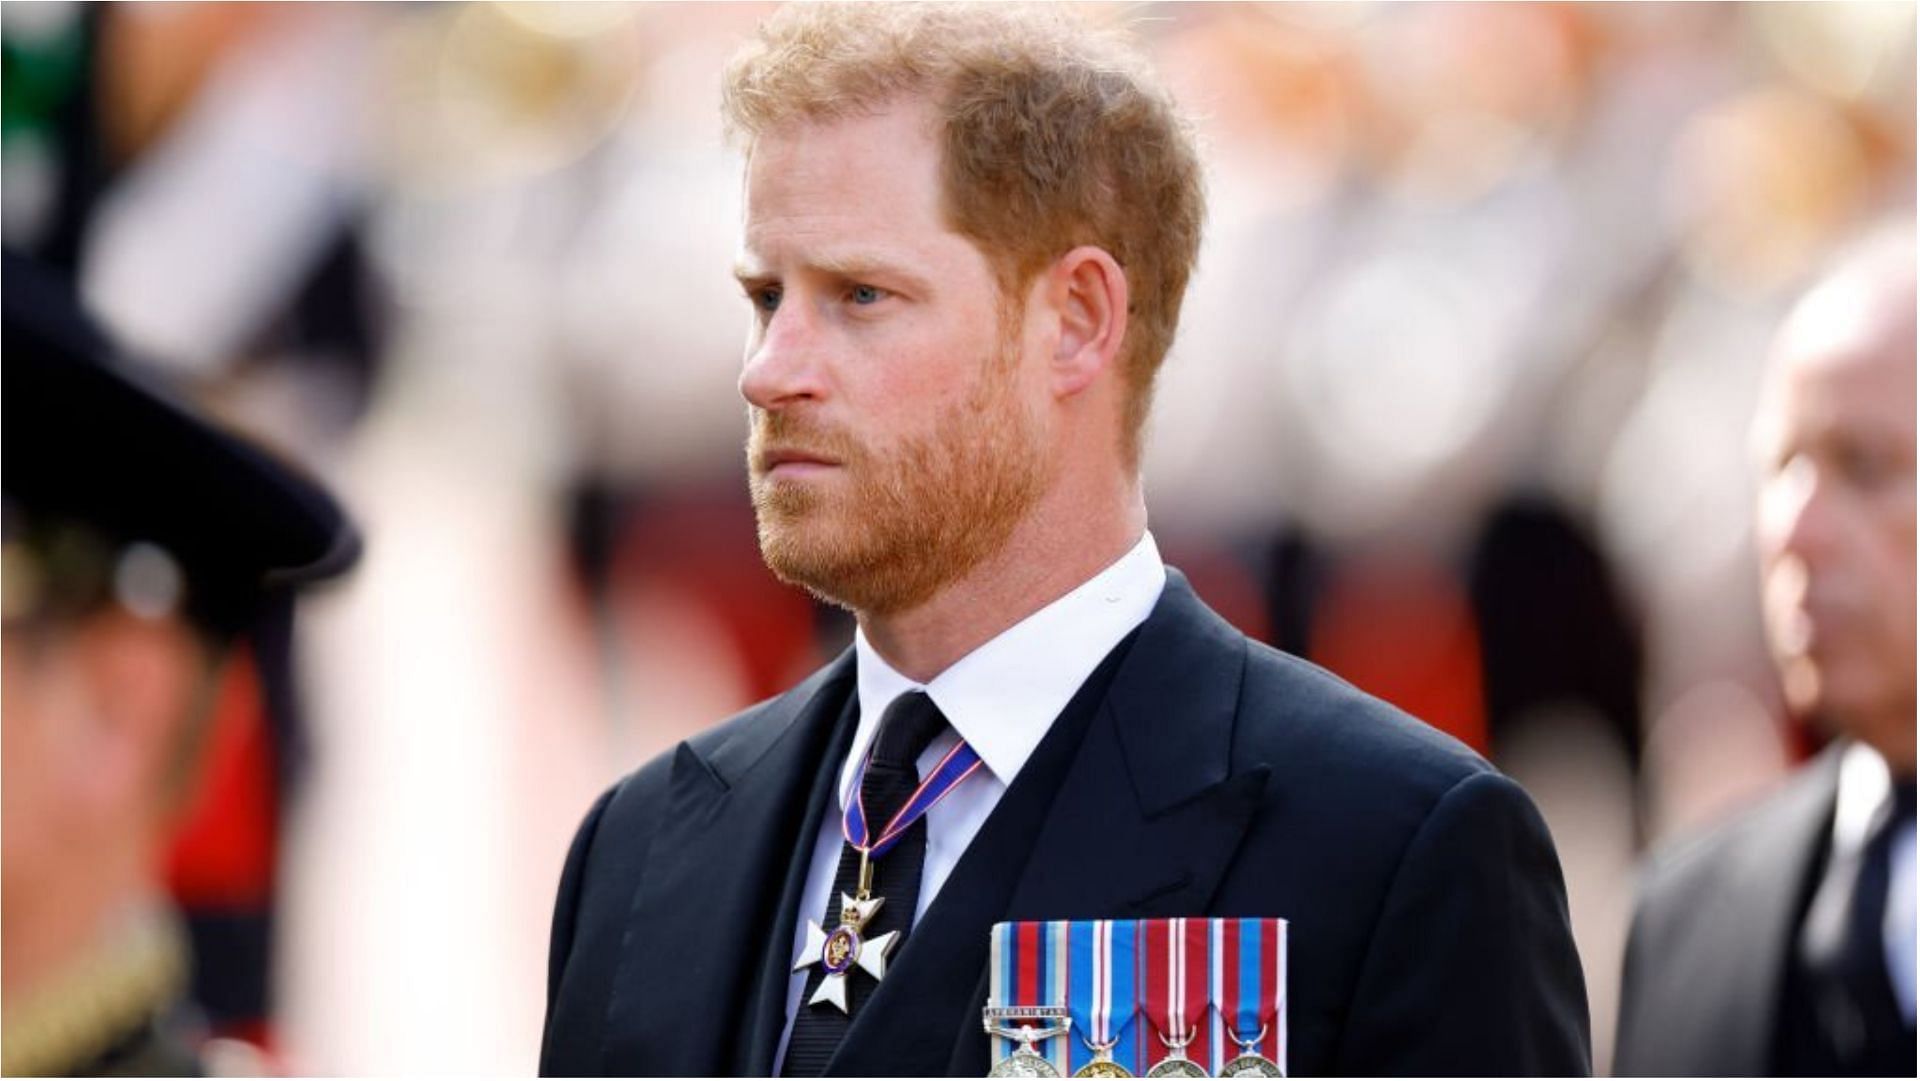 Prince Harry has made some major revelations on his memoir (Image via Max Mumby/Getty Images)